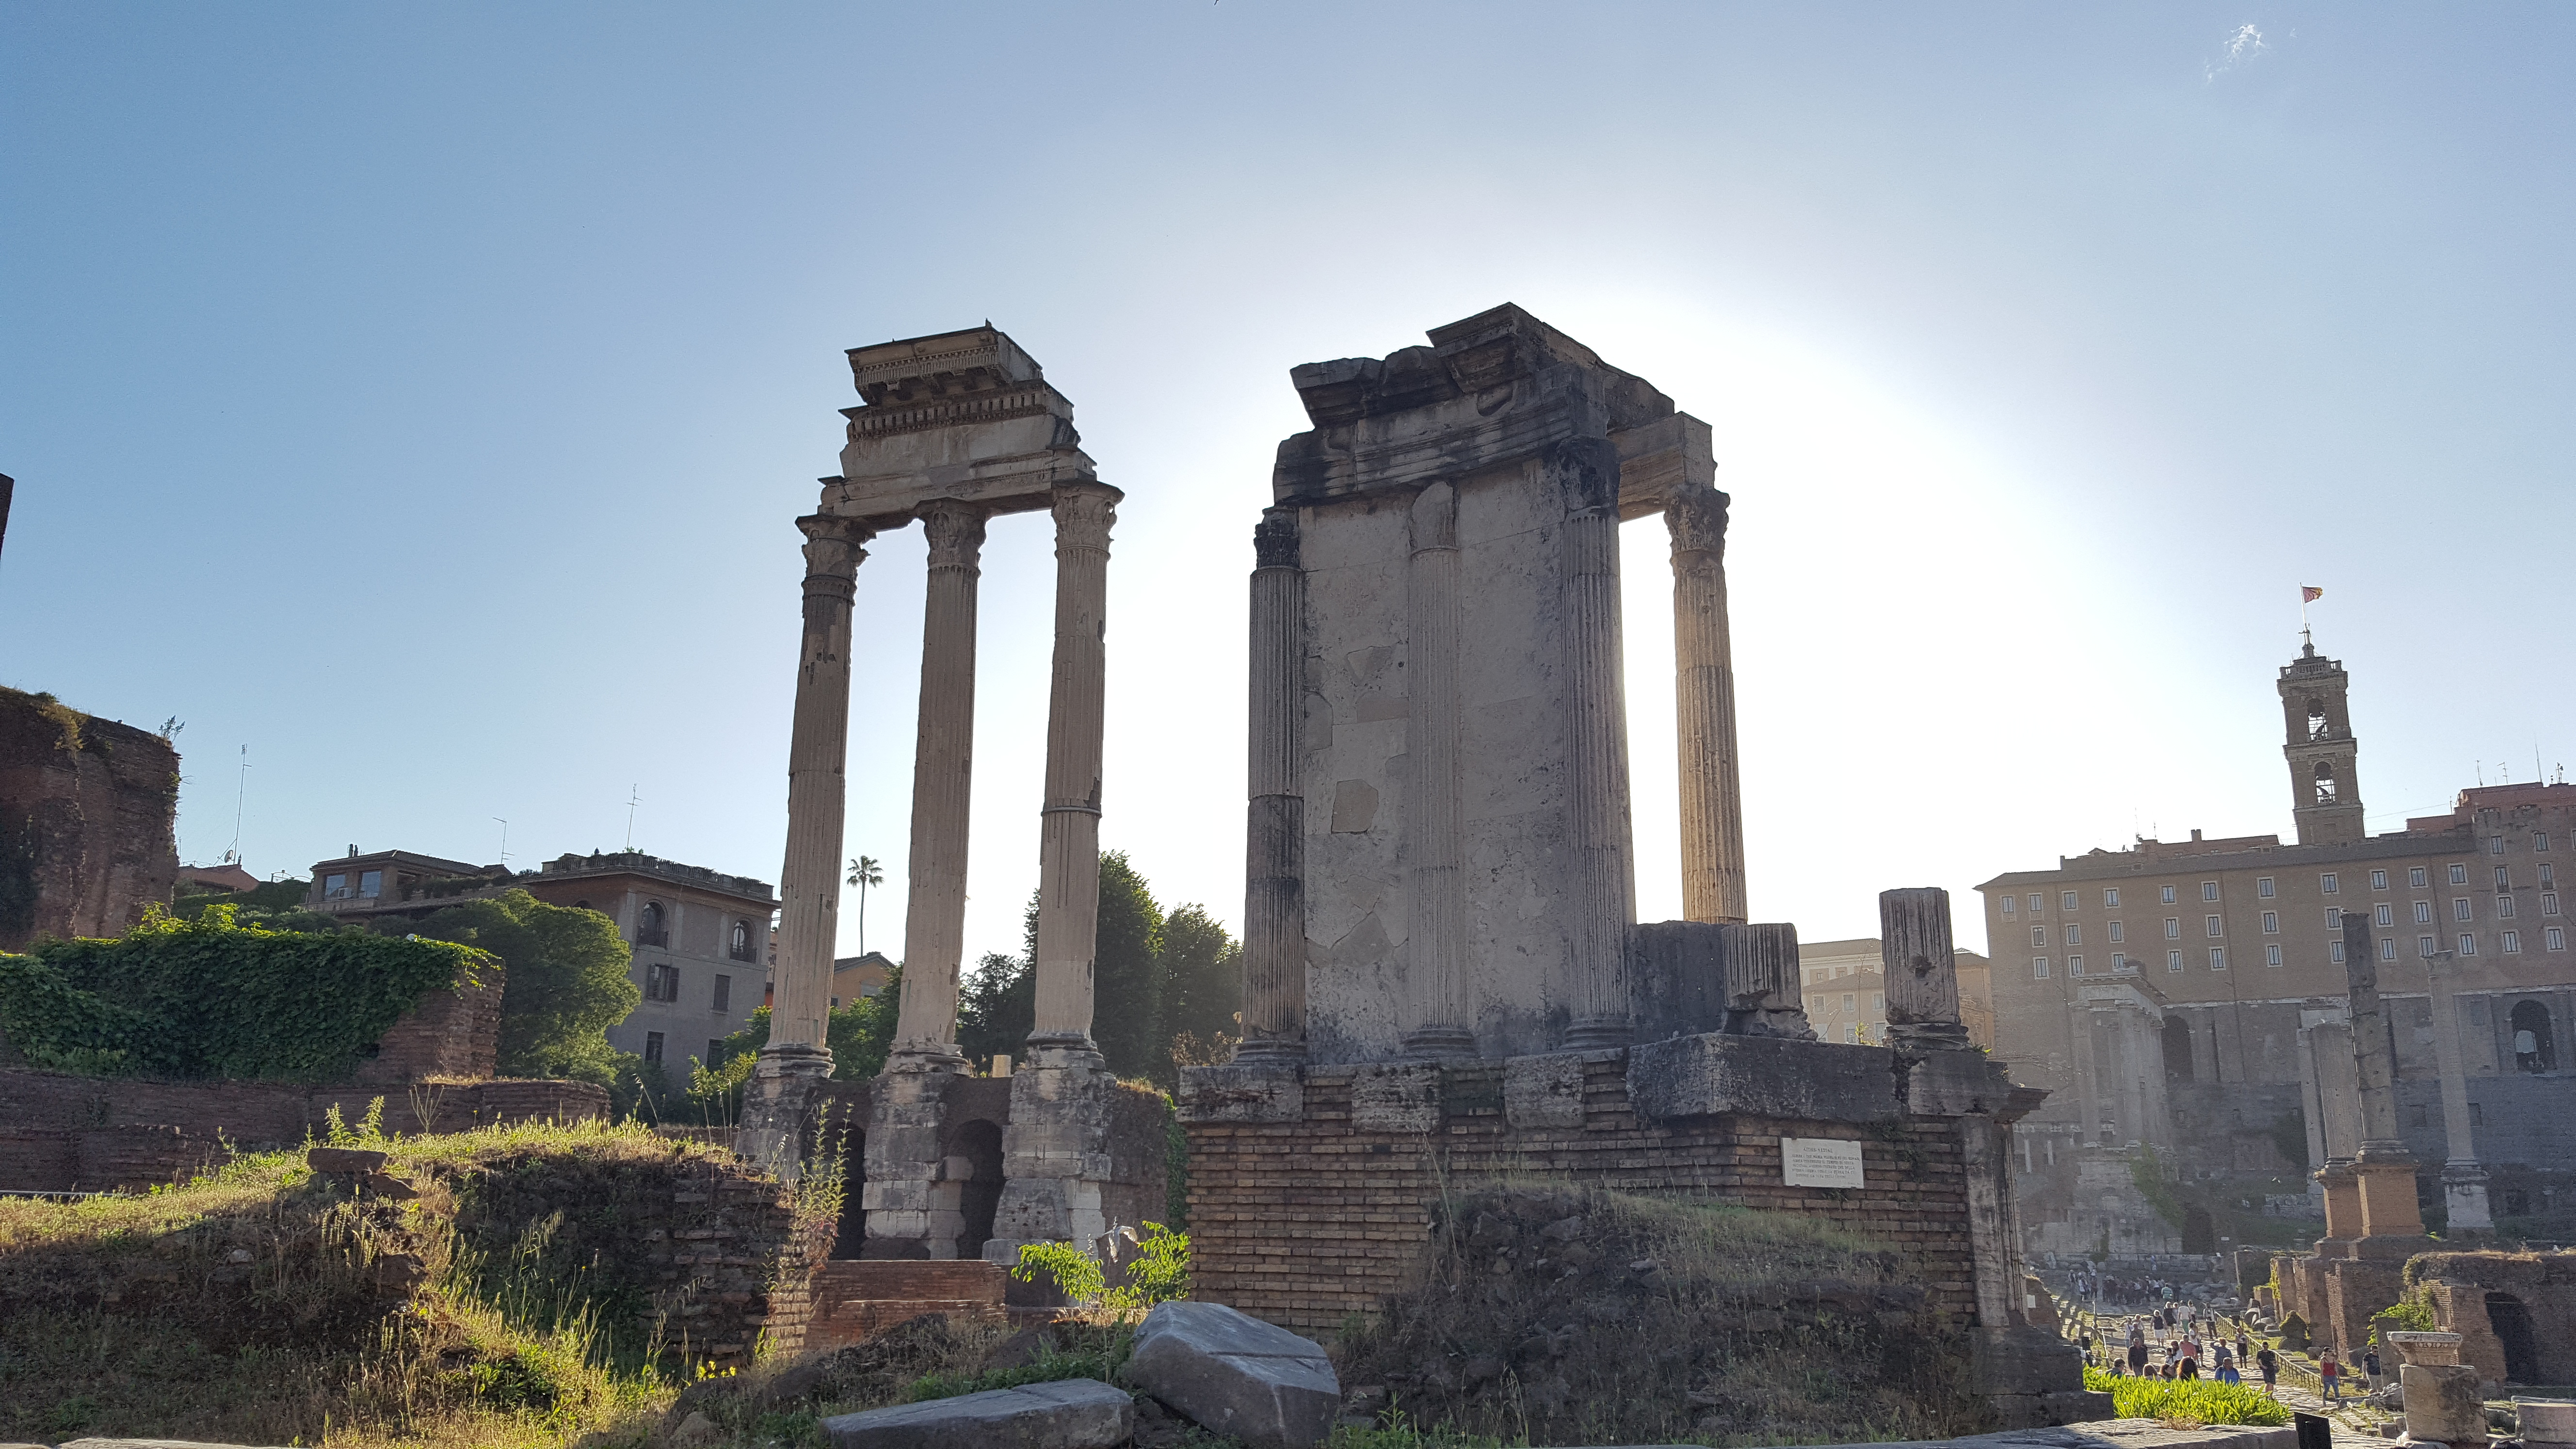 A view of the Roman Forum